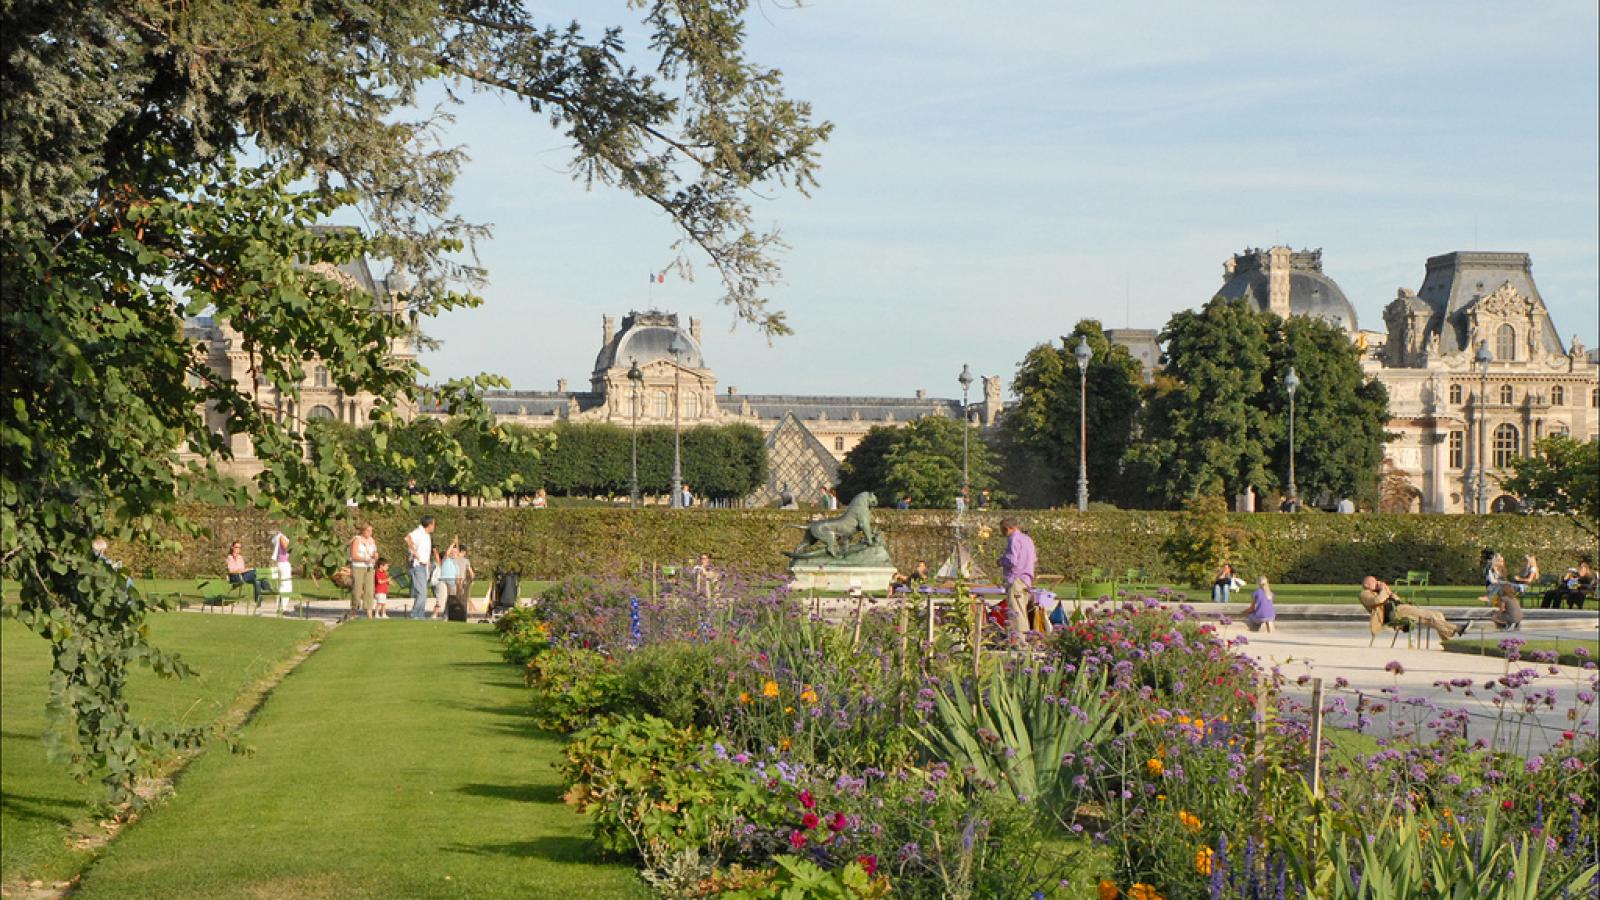 A day at the Tuileries Garden